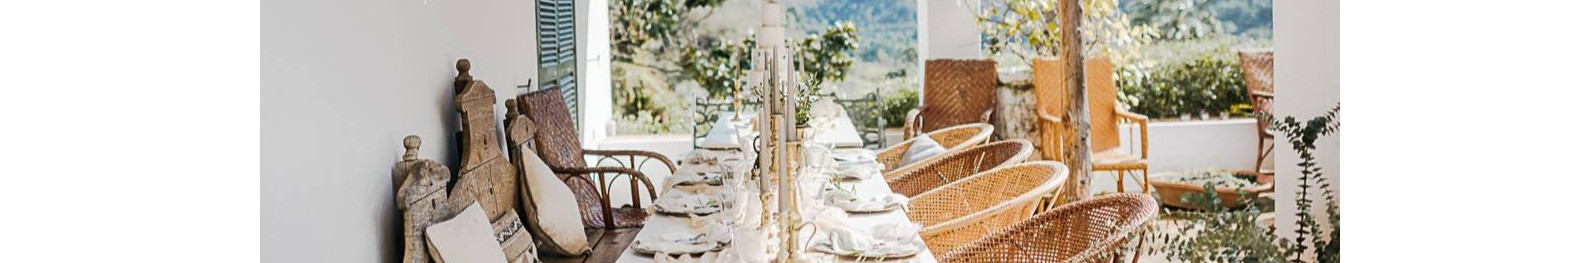 Tramores Weddings - Secluded rustic villa